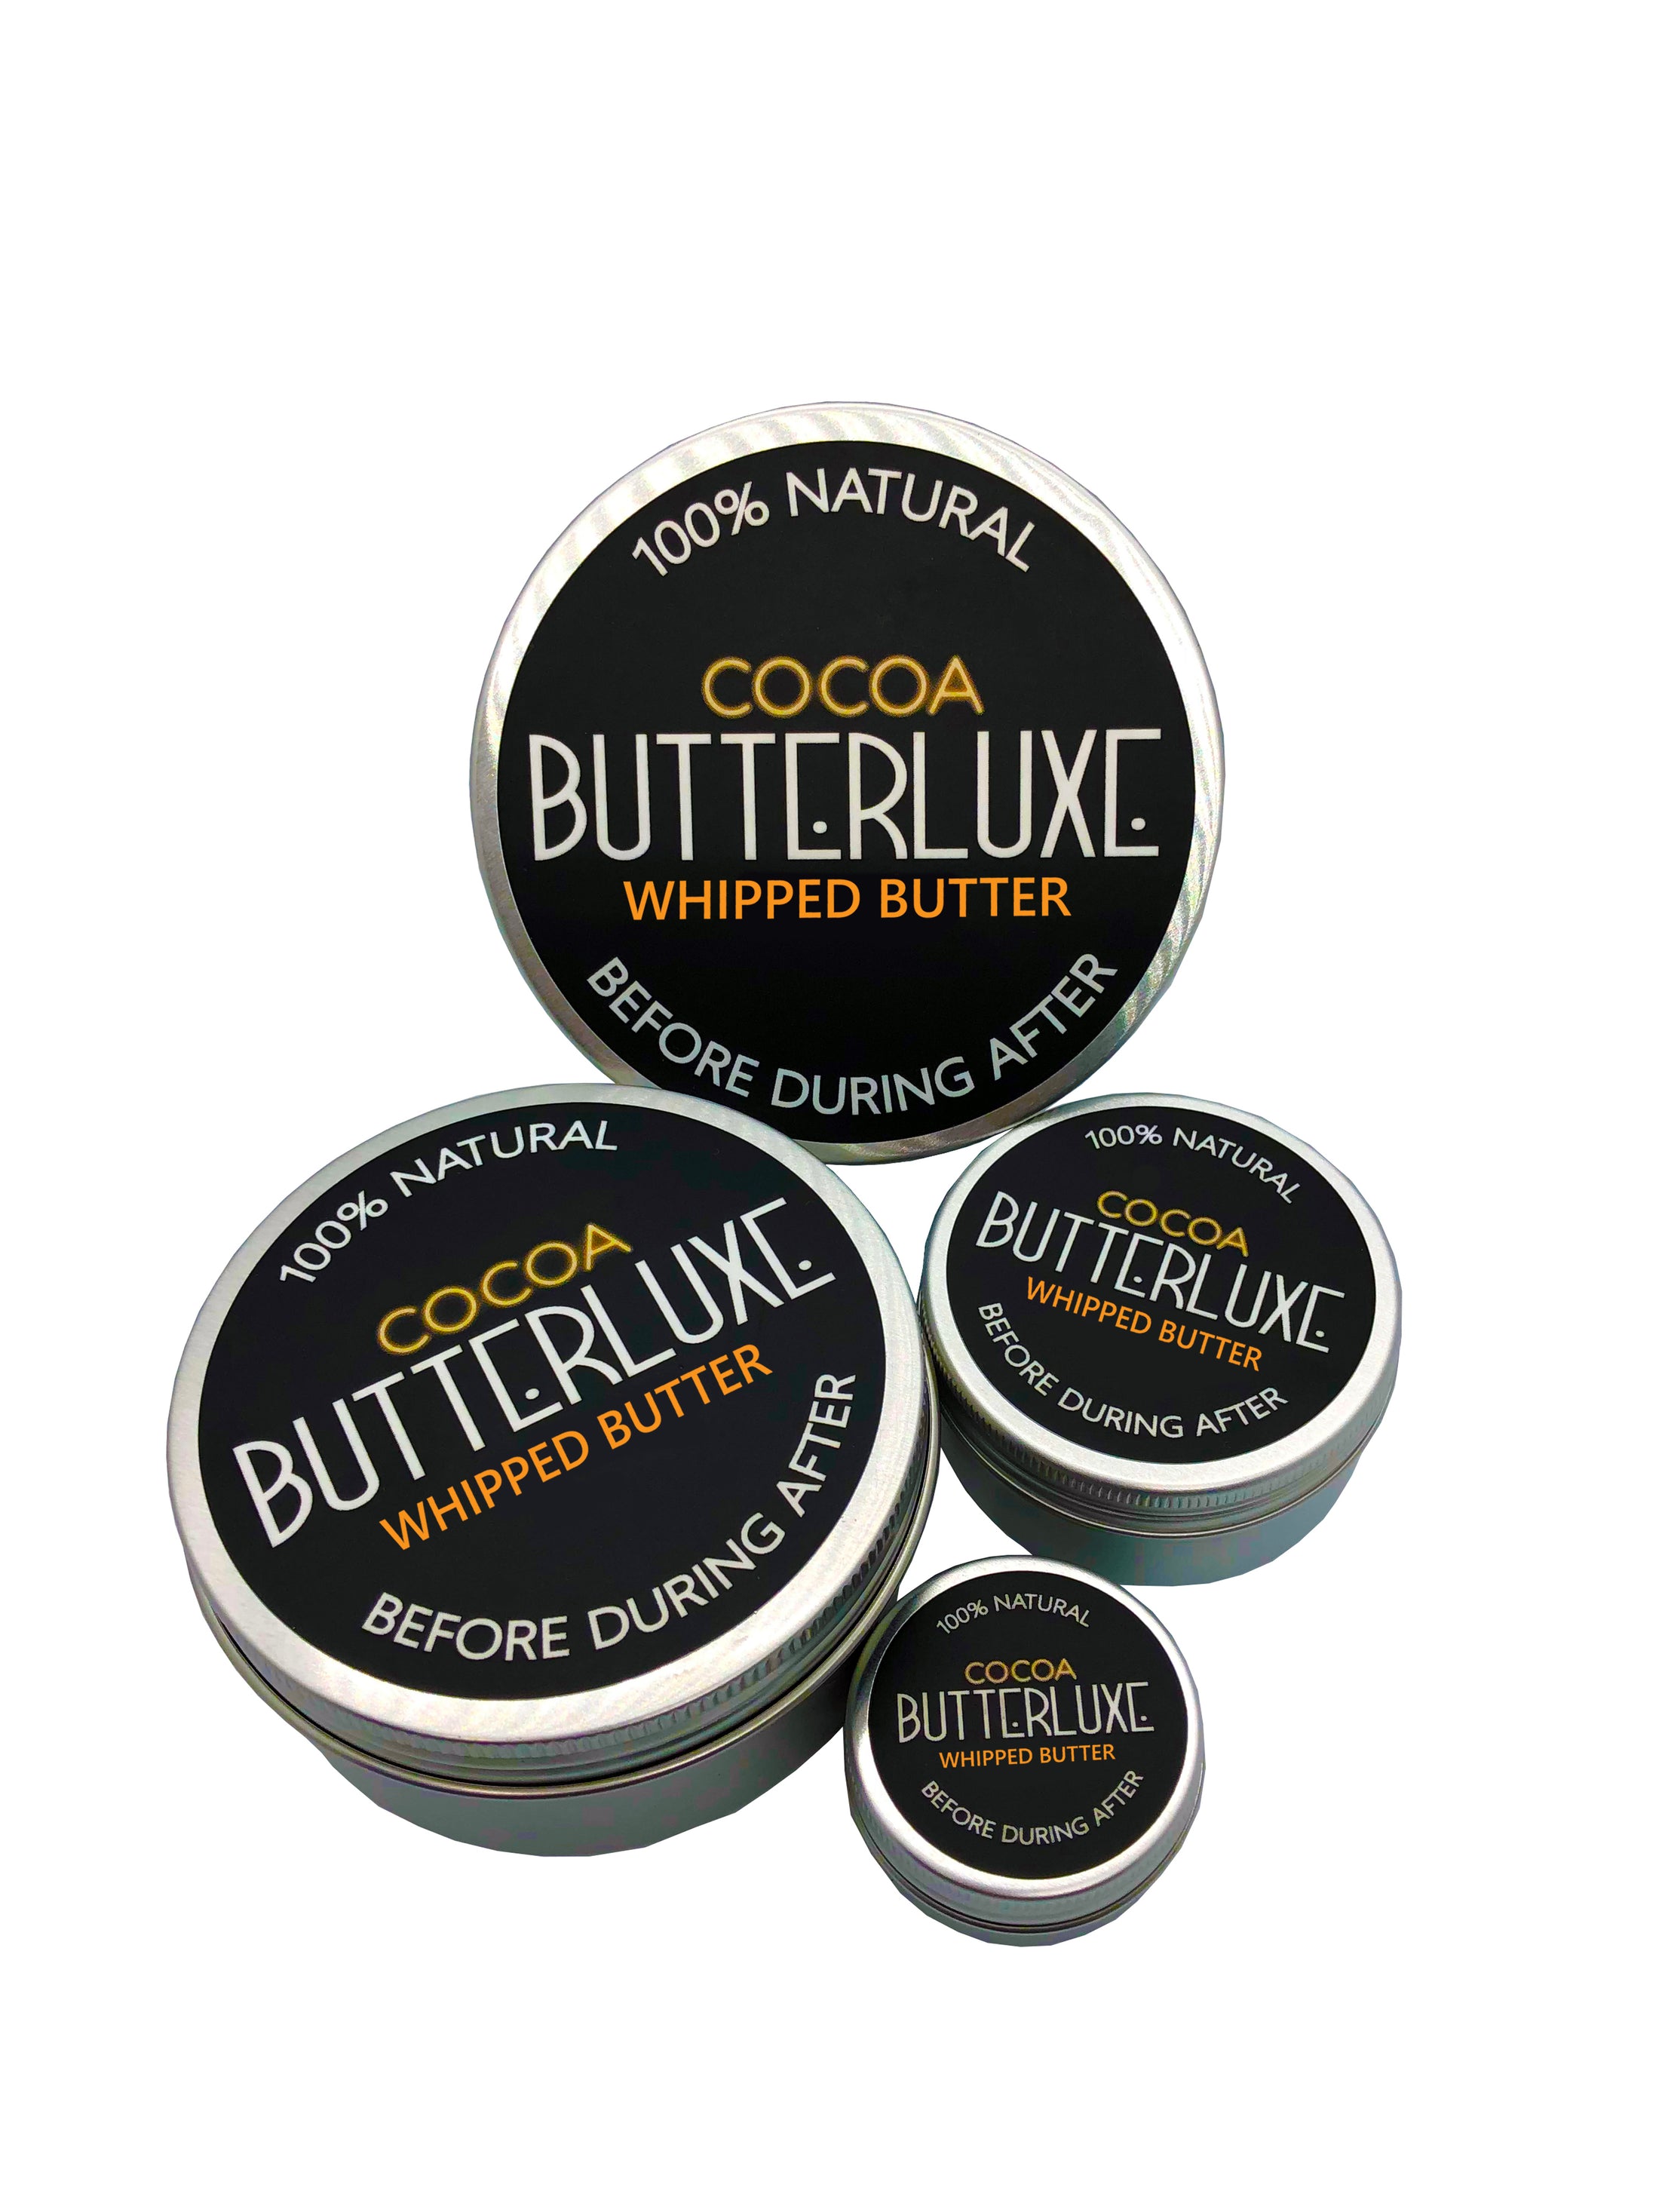 Cocoa Whipped Butter